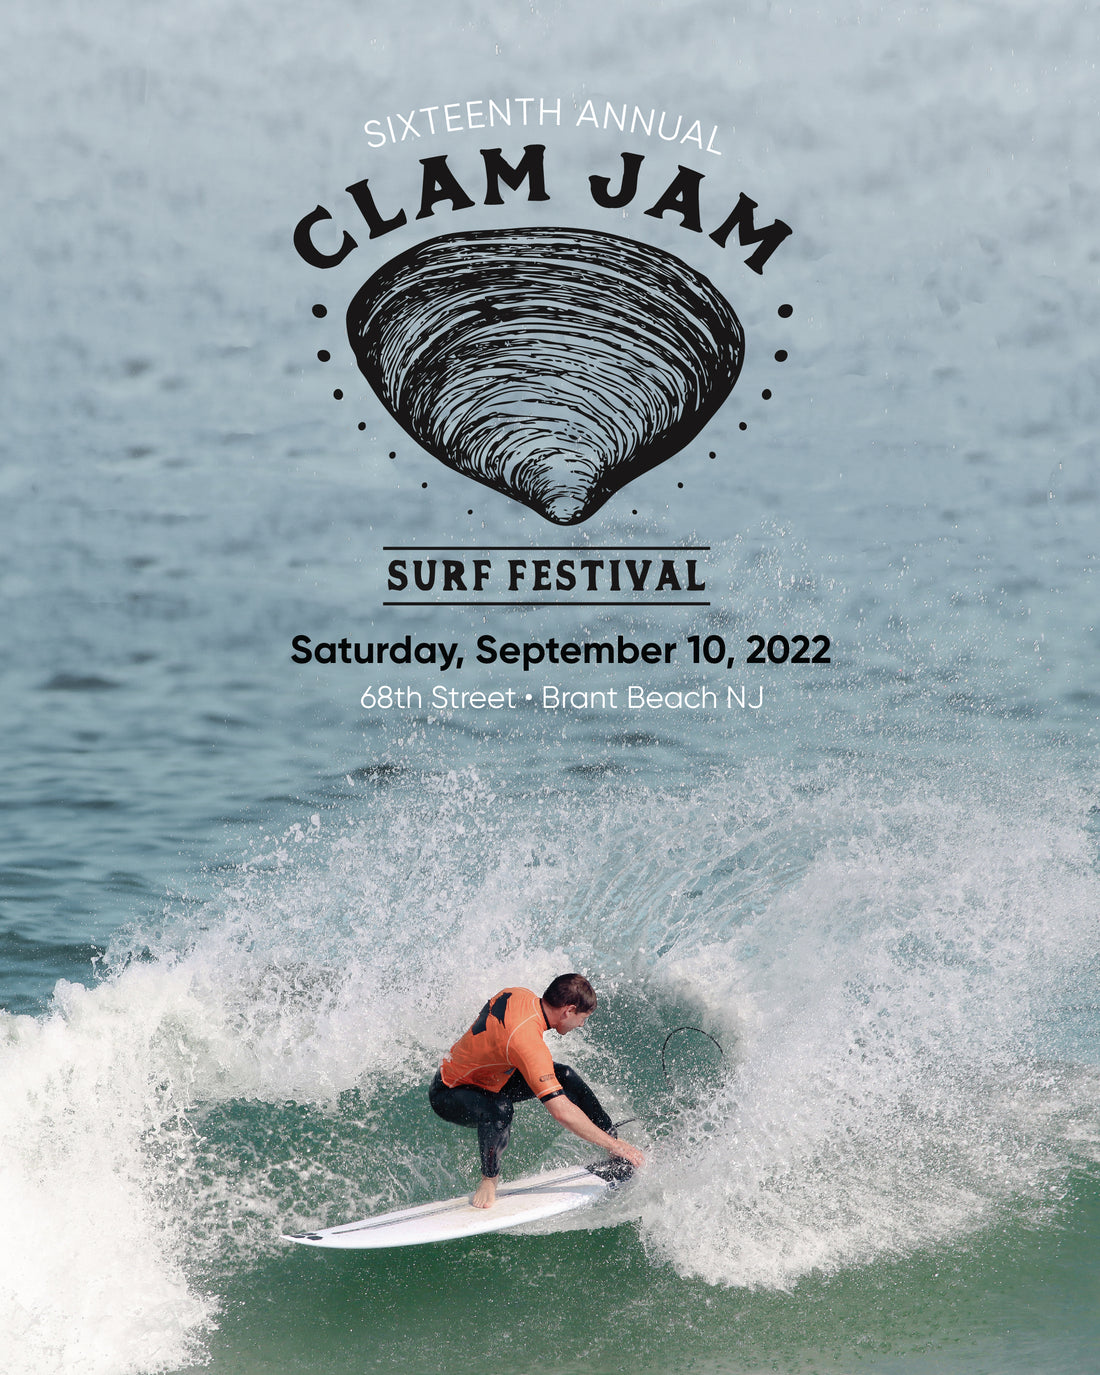 16th Annual Clam Jam Registration now open!